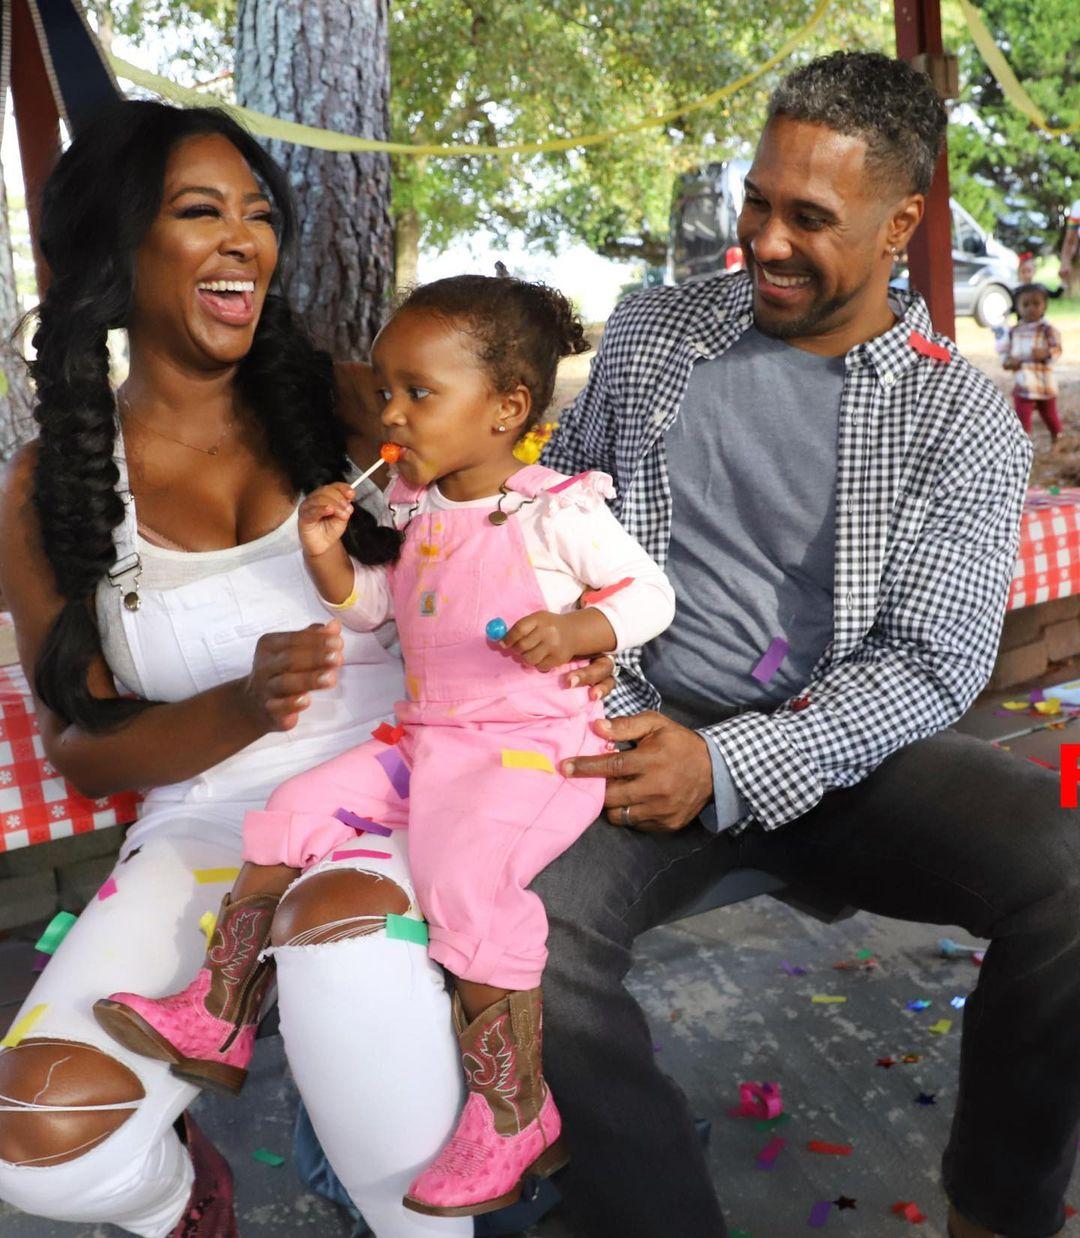 Kenya Moore Demands Full Custody Of Daughter Over ‘Safety’ Issues